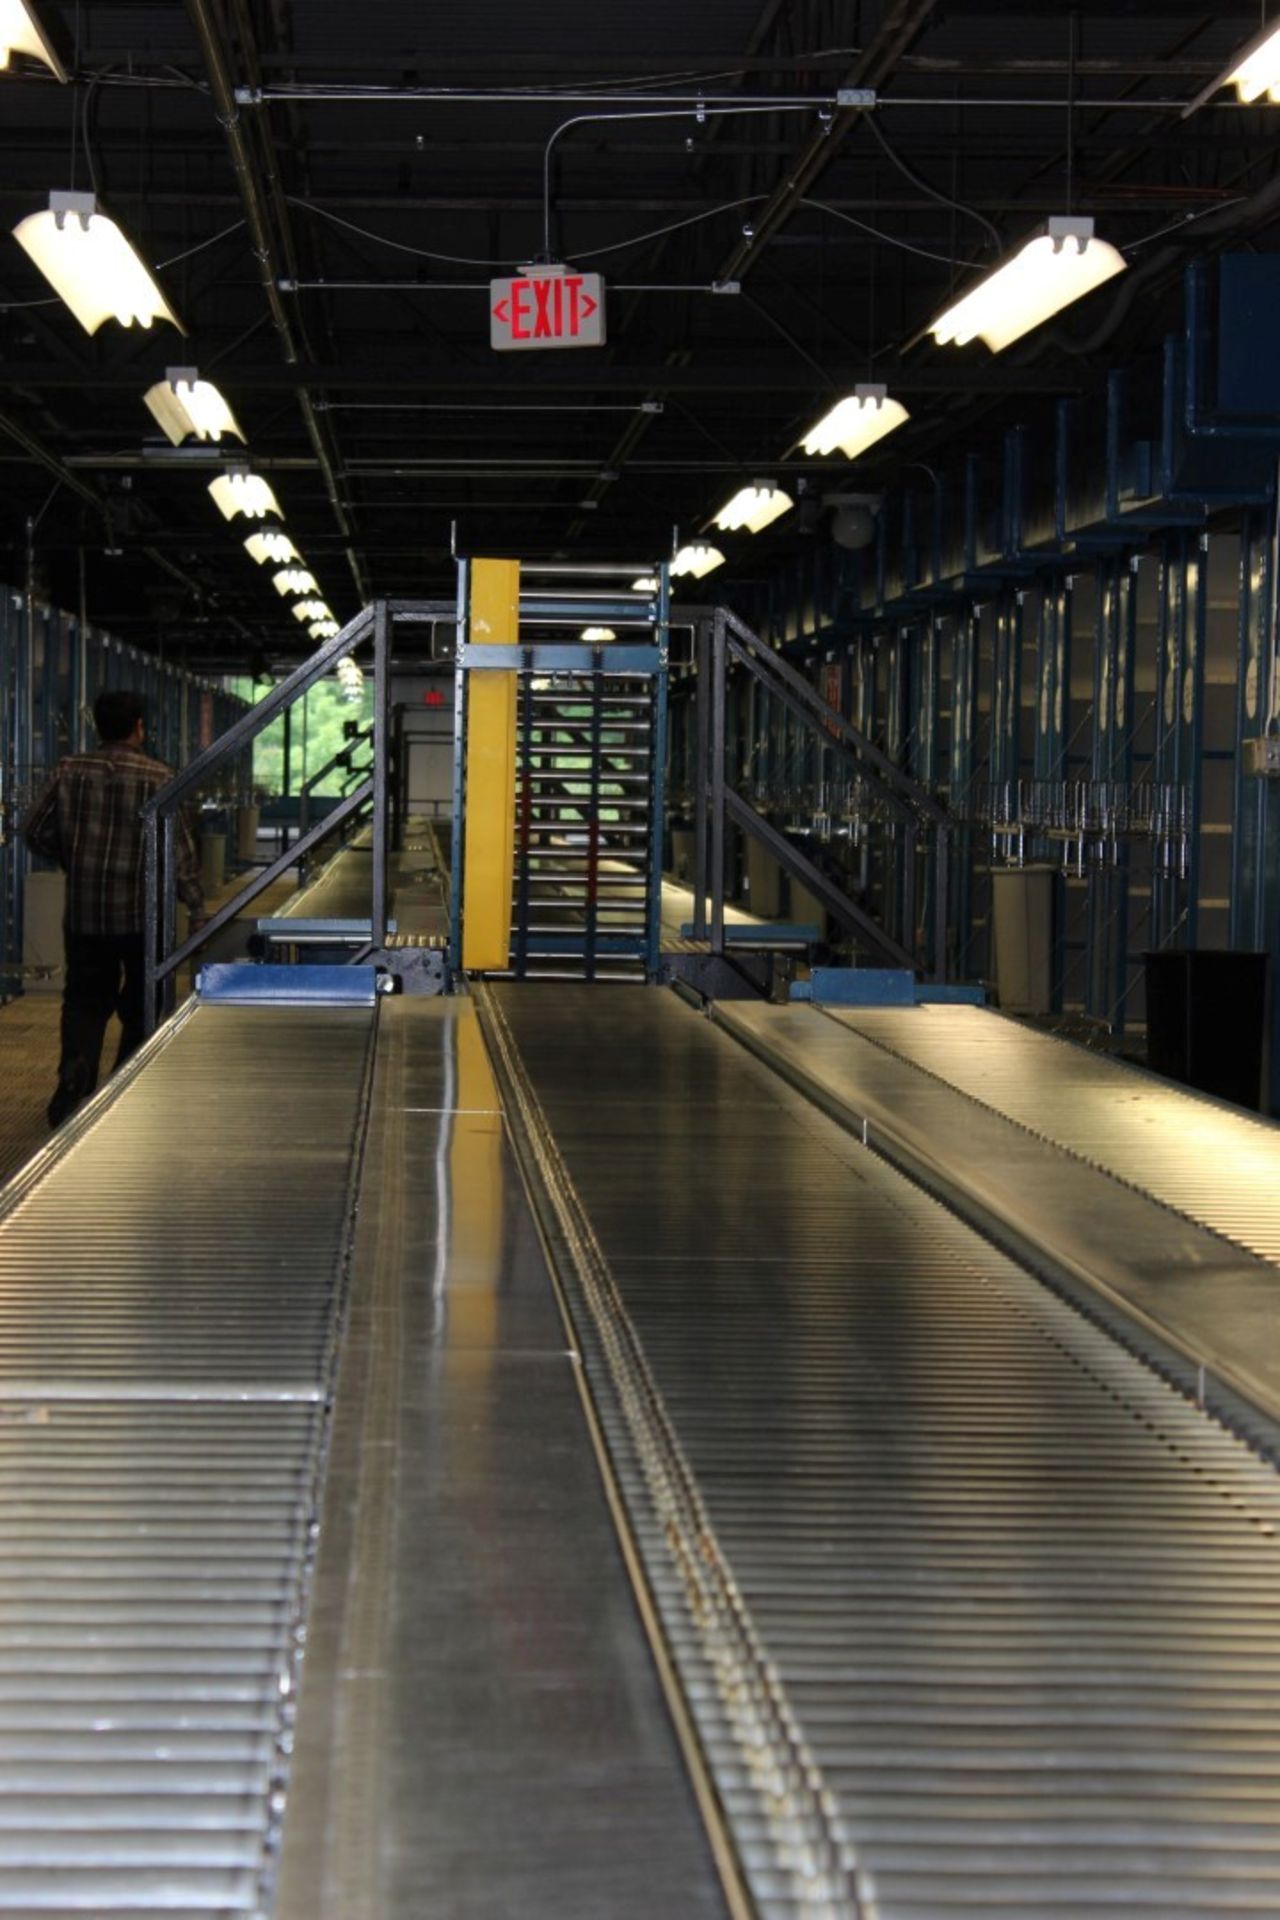 30 FT LONG 24"W RAPISTAN POWERED CONVEYOR WITH 18"W GRAVITY CONVEYOR LINES BOTH SIDES - Image 3 of 4